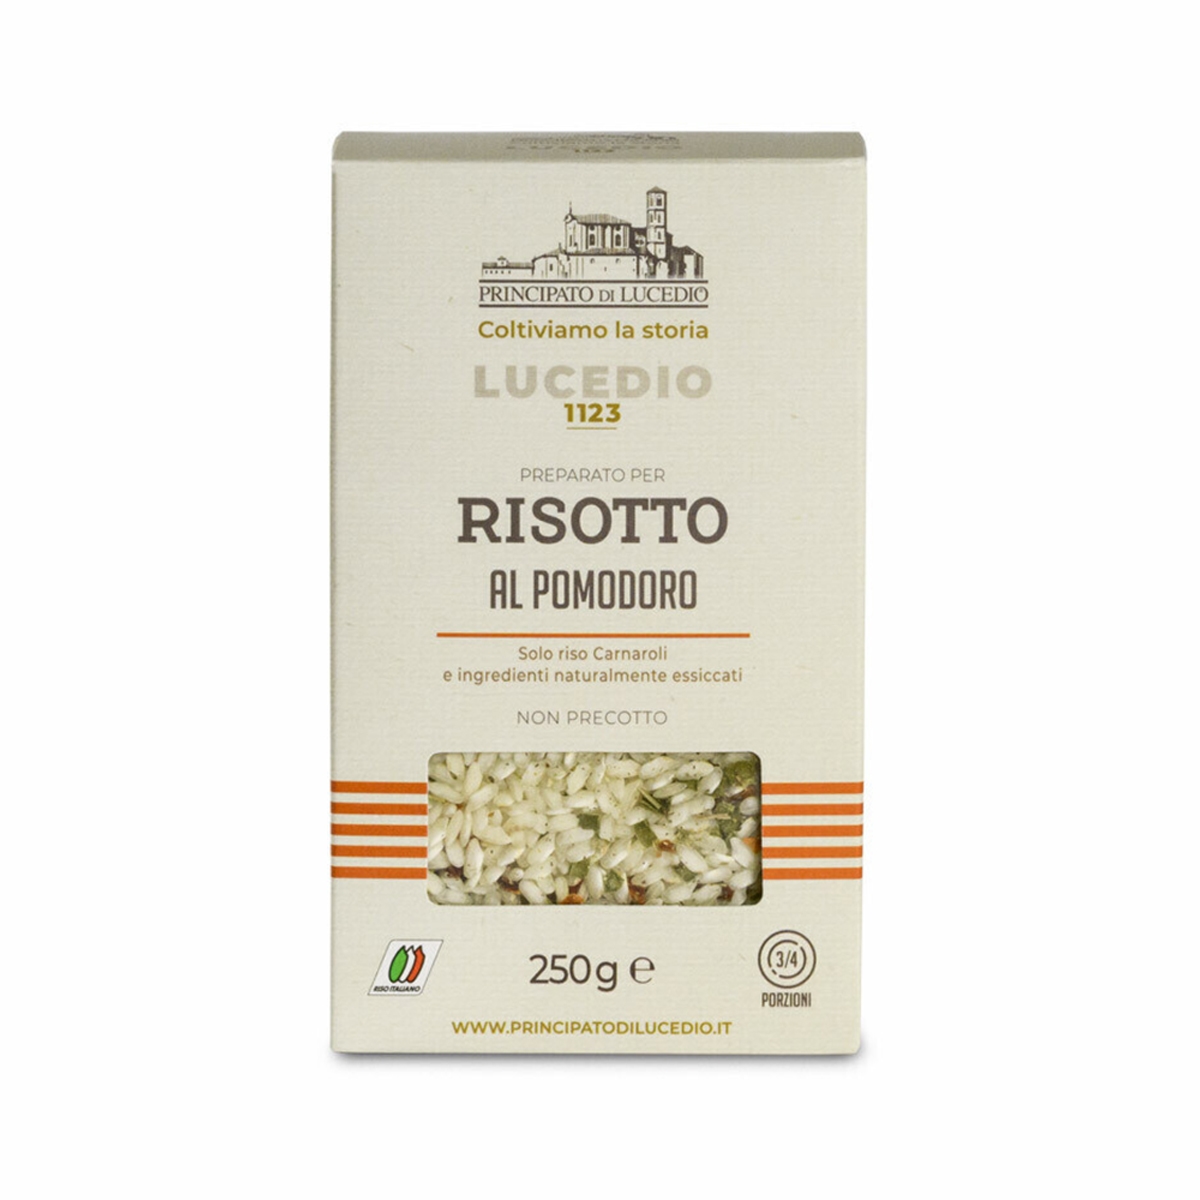 Risotto with Tomato - 250 g - Packaged in Protective Atmosphere